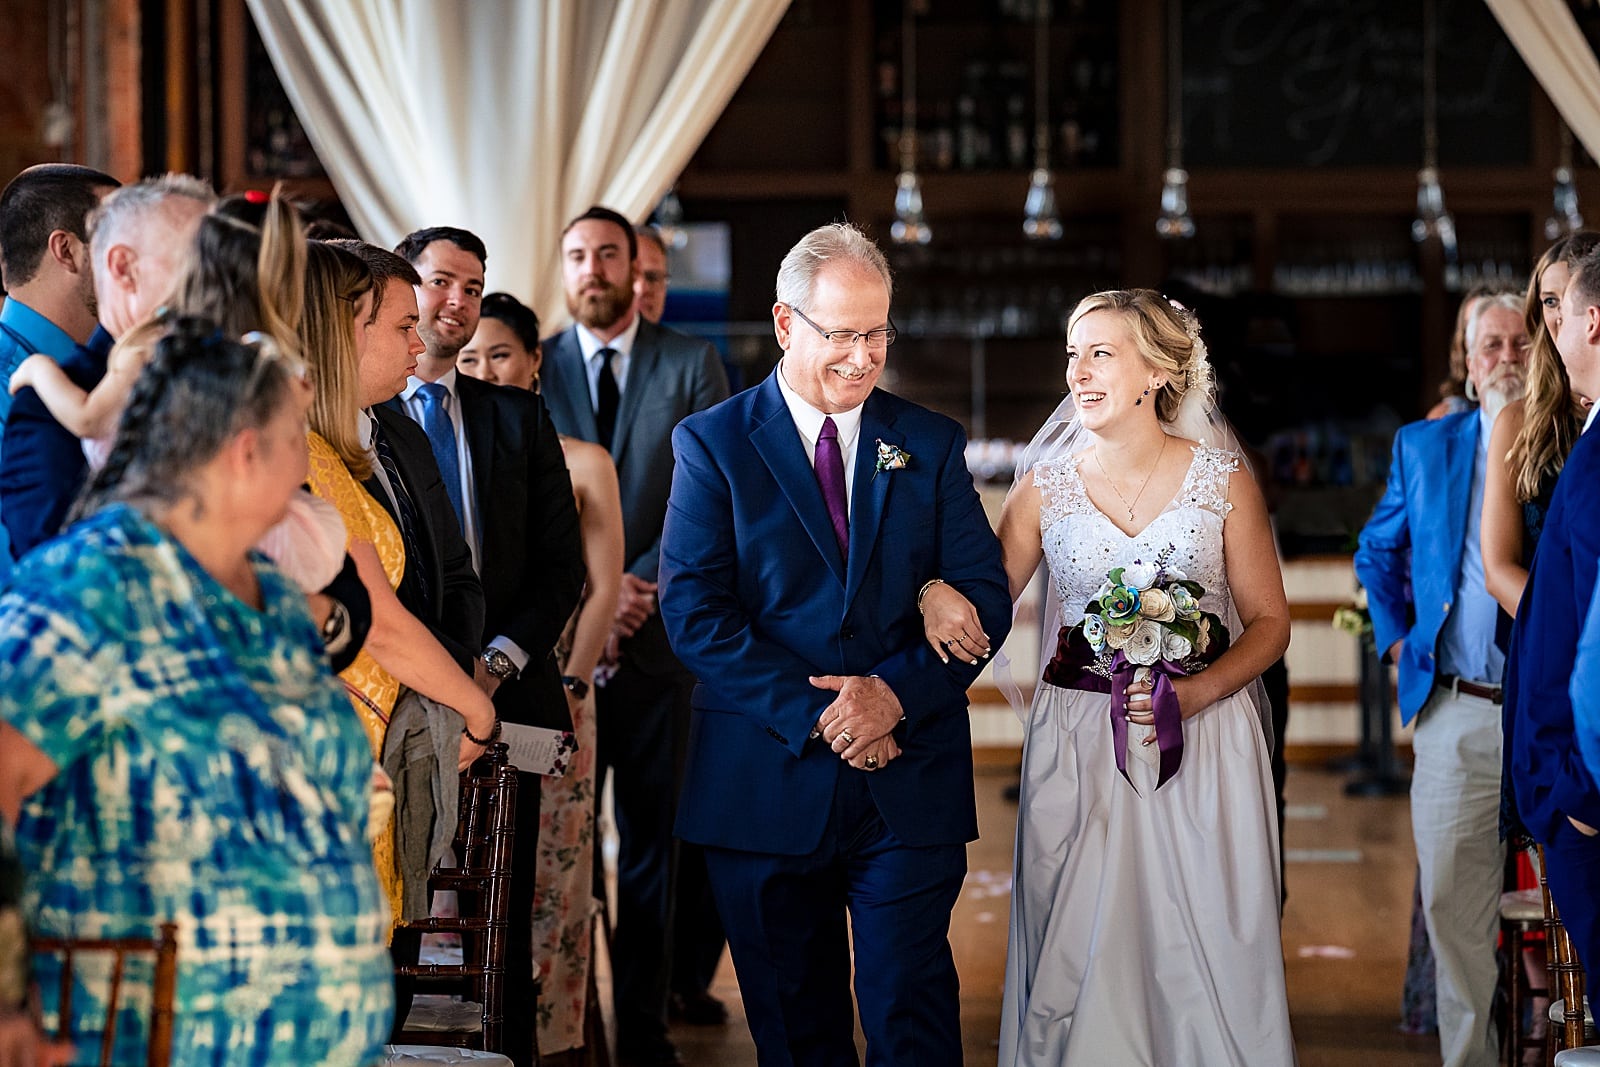 Bride and her father make their way down the aisle at The Cotton Room